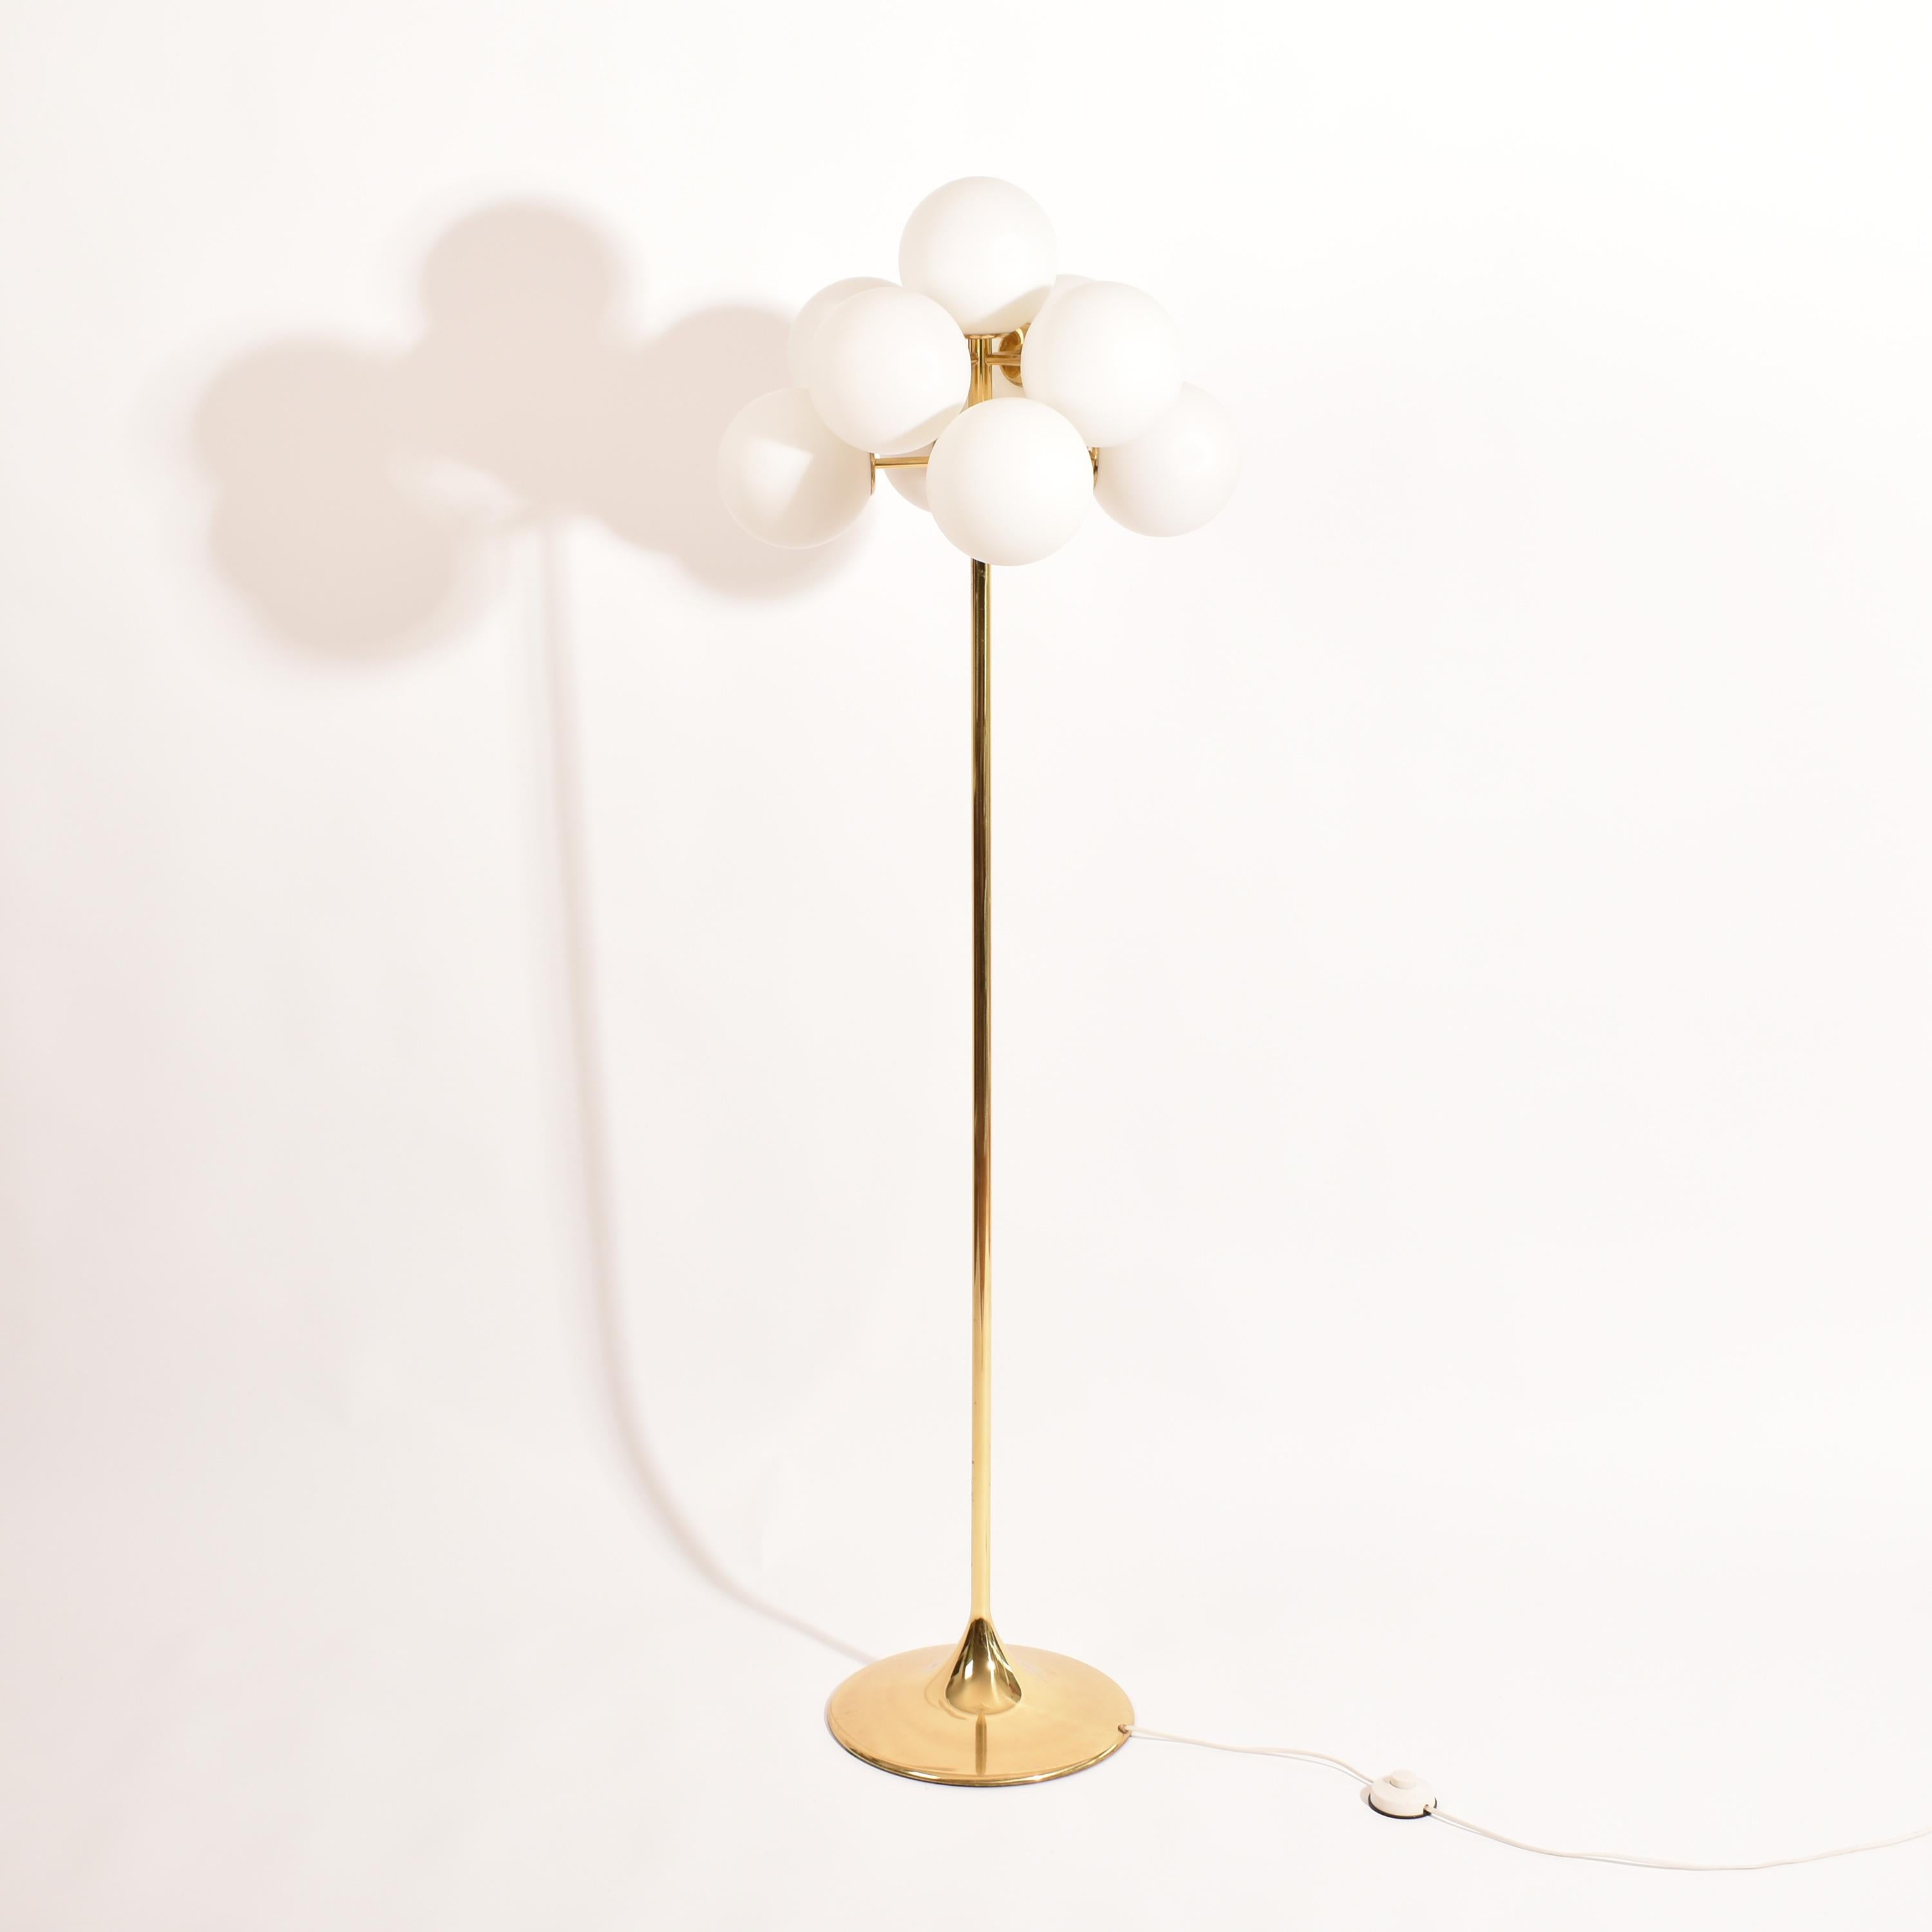 Brass Mid-Century Modern Atomic Floor Lamp Gold and White By E.R. Nele for Temde 1960